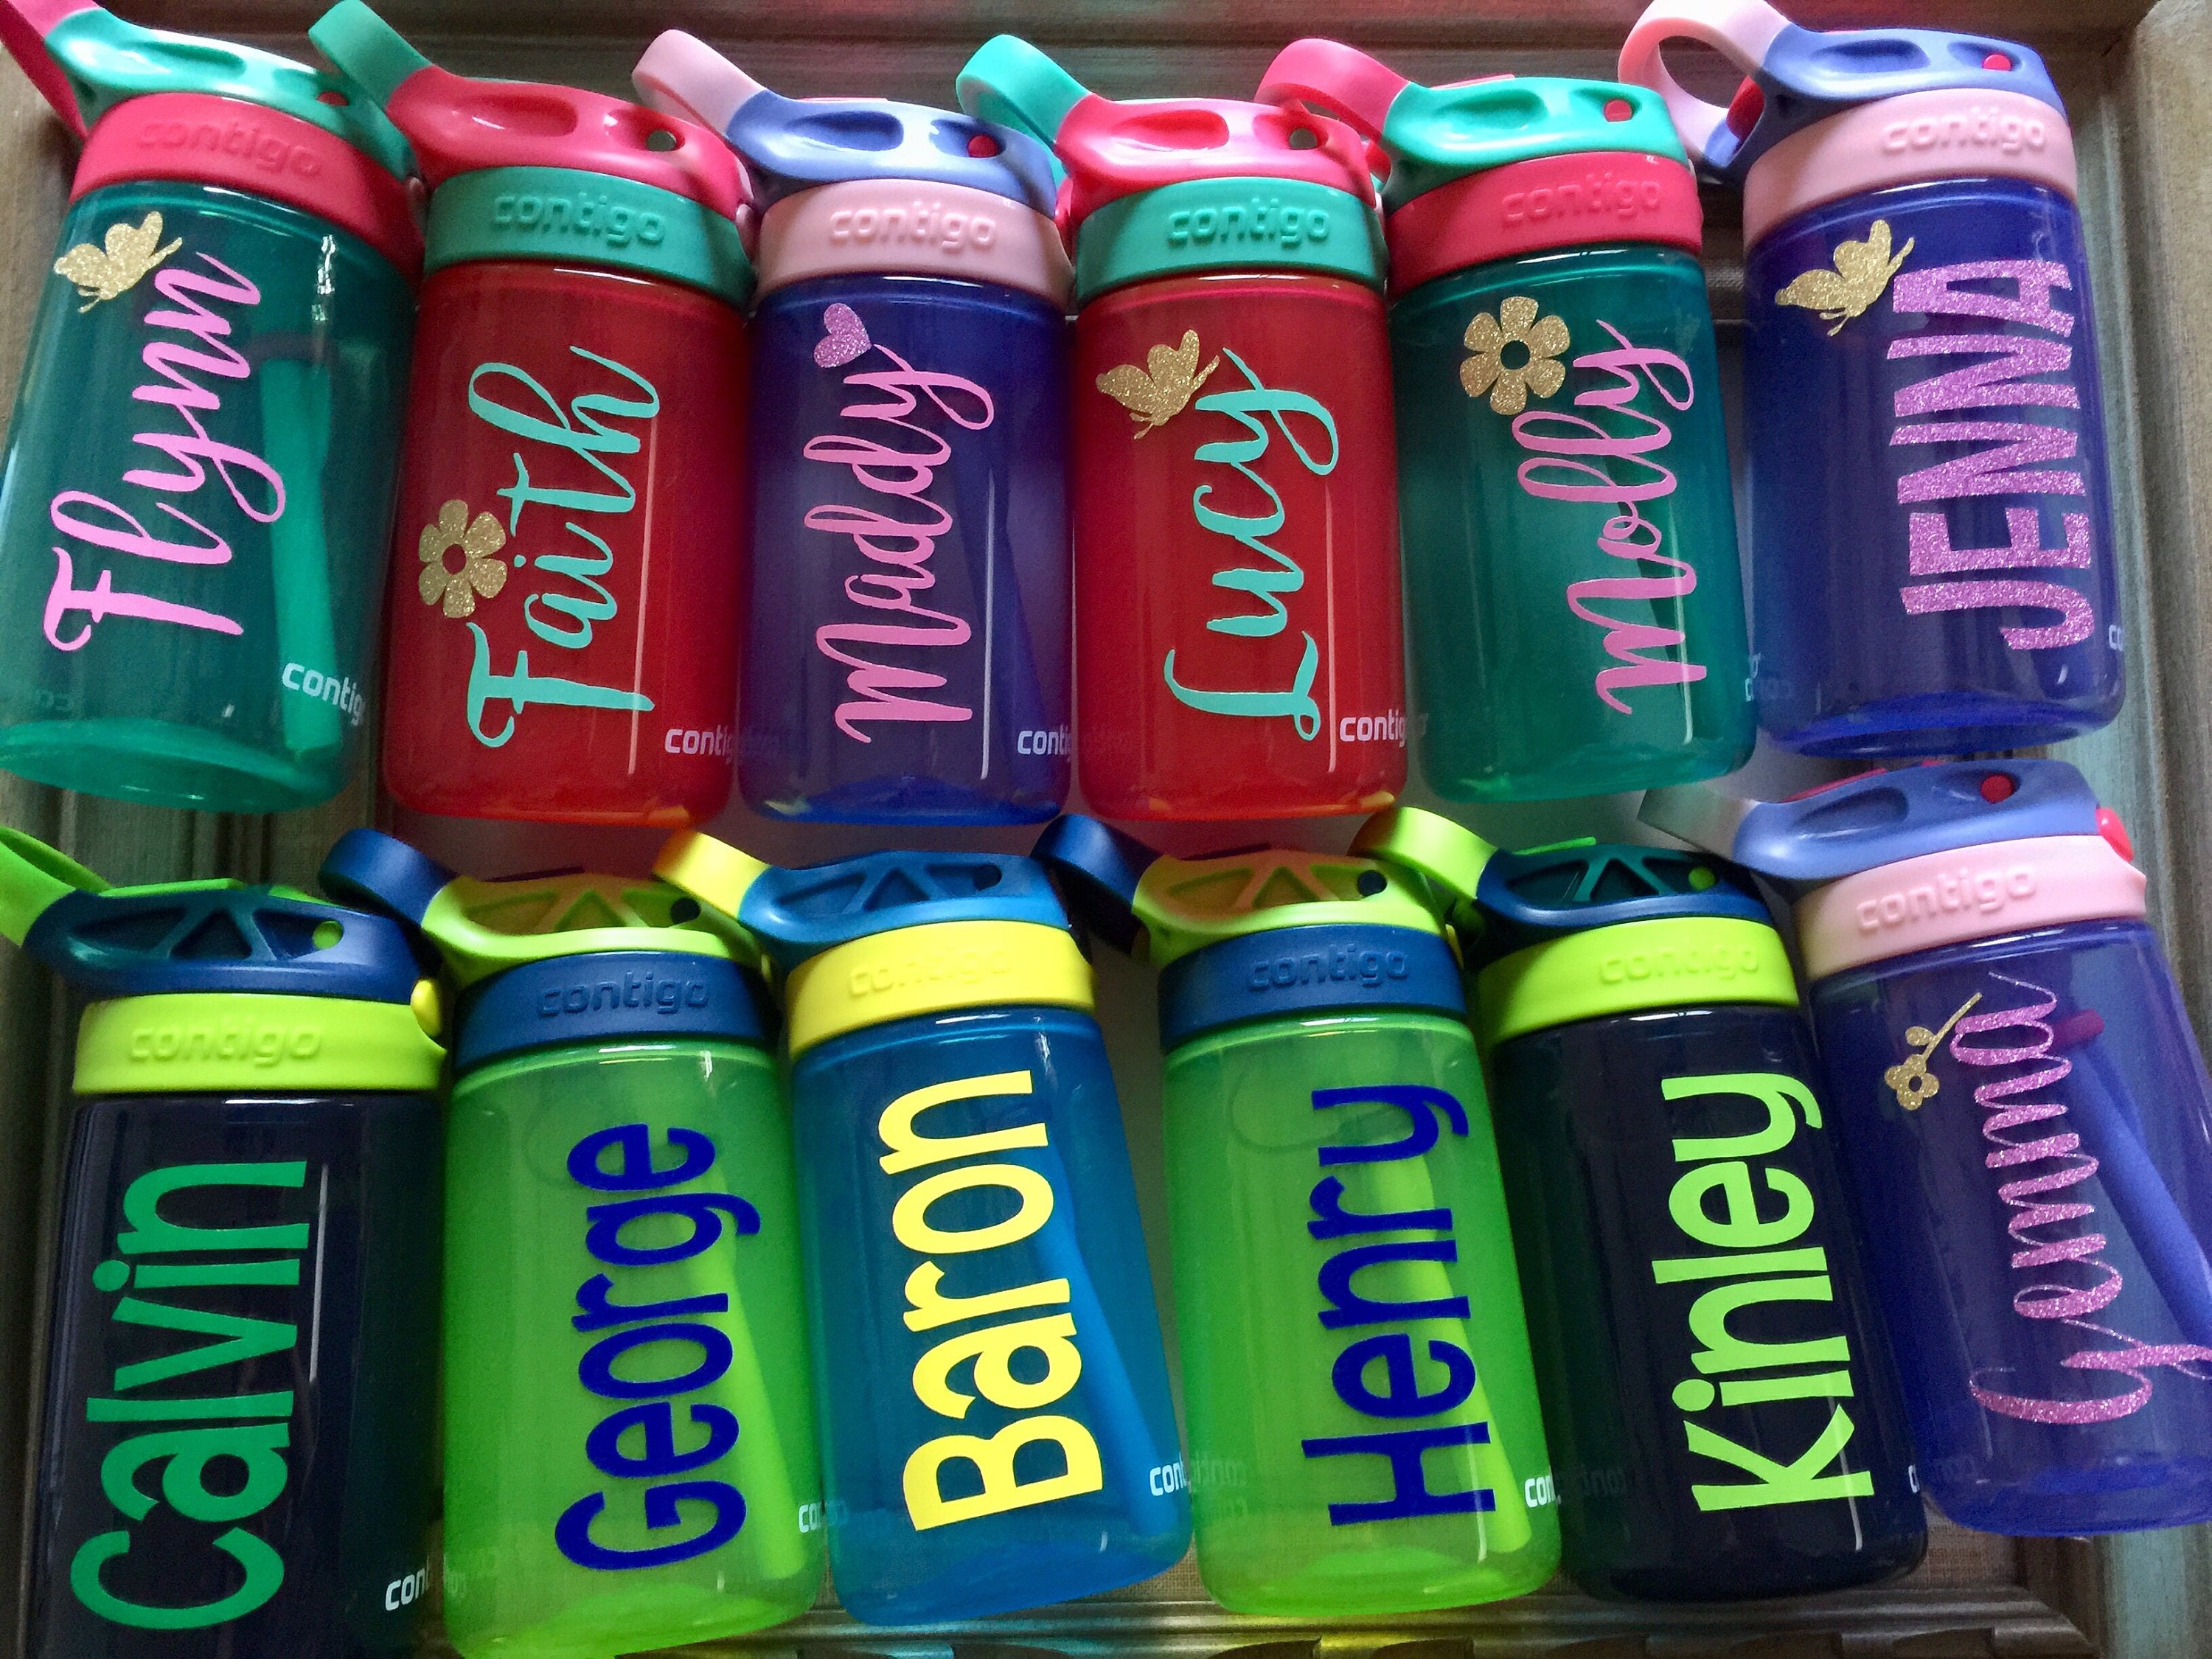 Truck Personalized Water Bottle Kids Personalized Stainless Steel Car Water  Bottle Contigo Sports Cup Name Bottle Easter Boy Gift Drinkware 